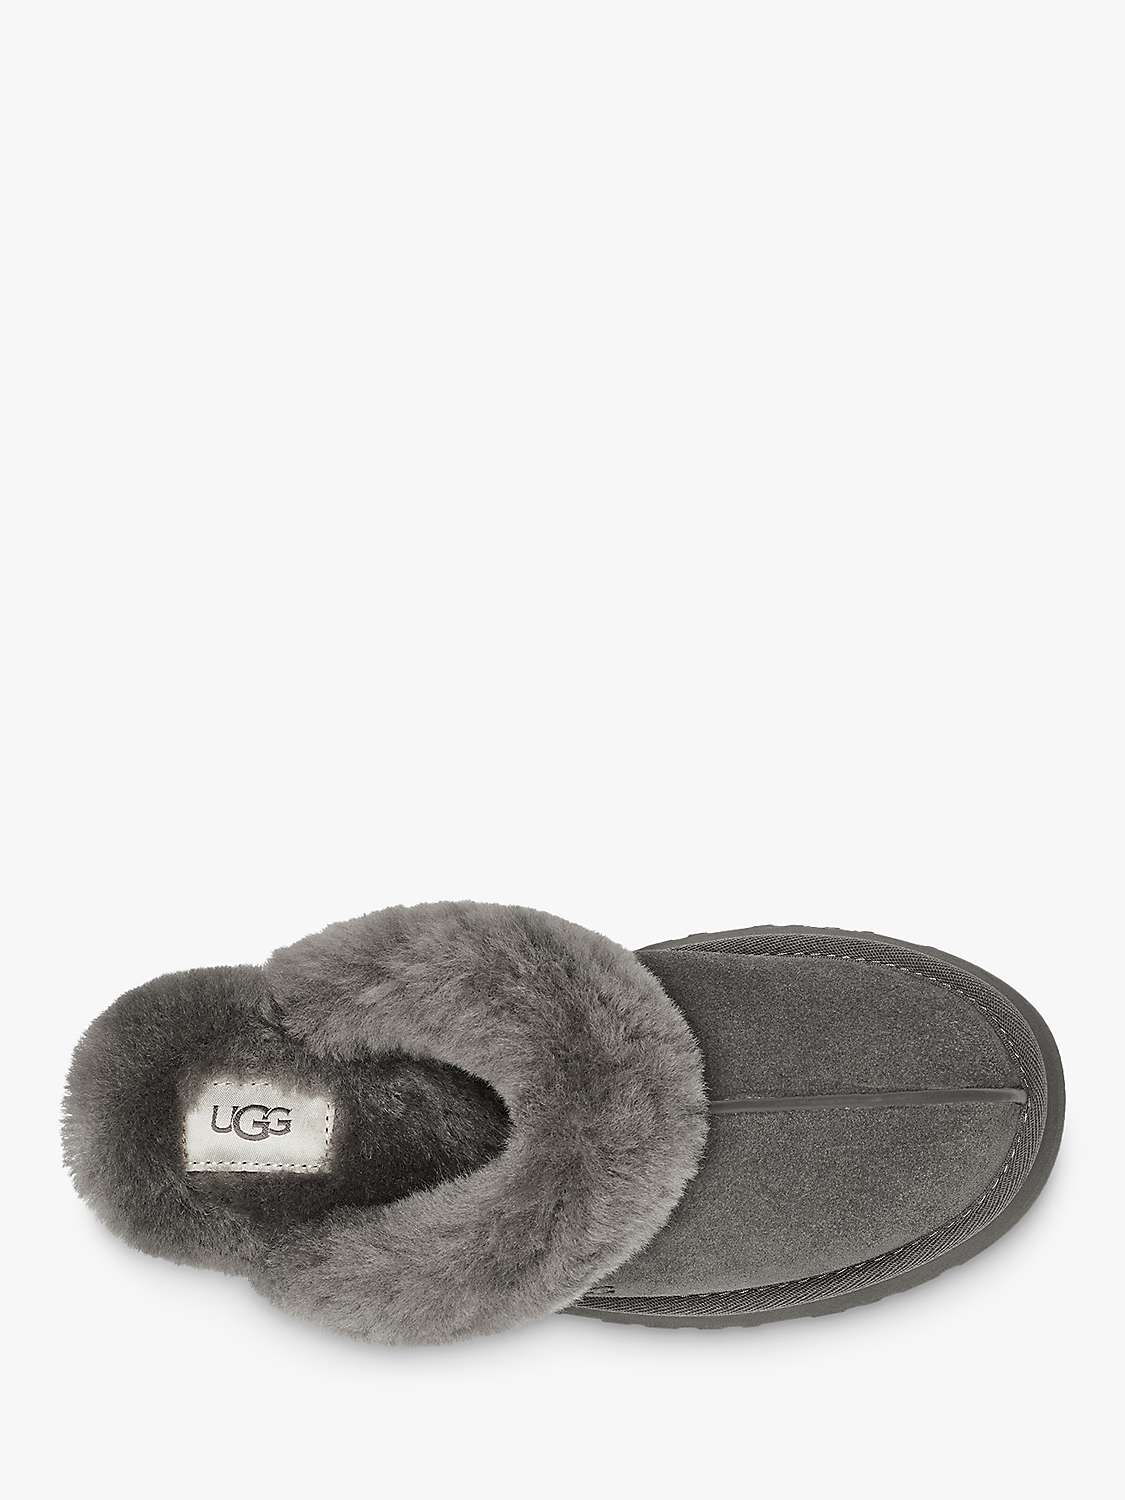 Buy UGG Disquette Suede Slippers Online at johnlewis.com